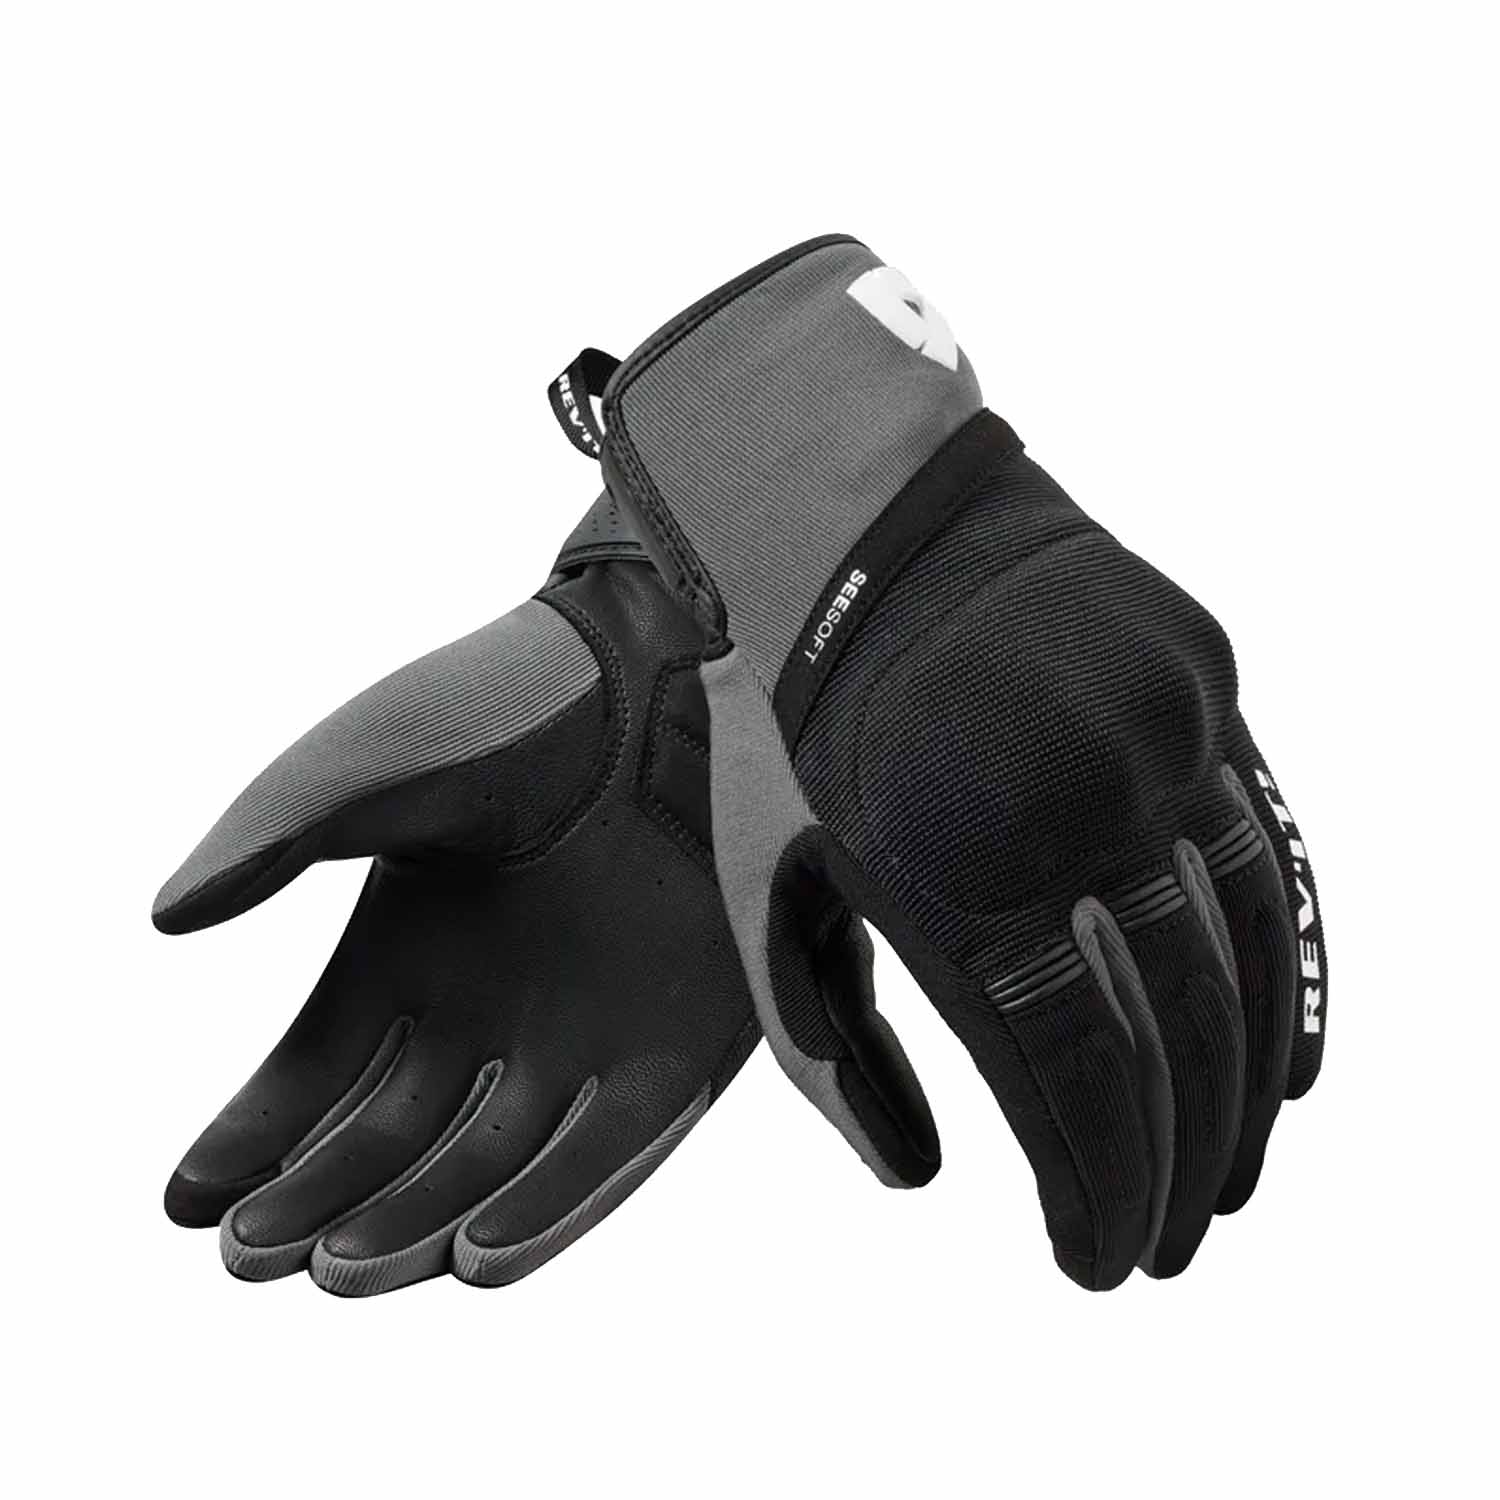 Image of EU REV'IT! Mosca 2 Gloves Black Grey Taille S